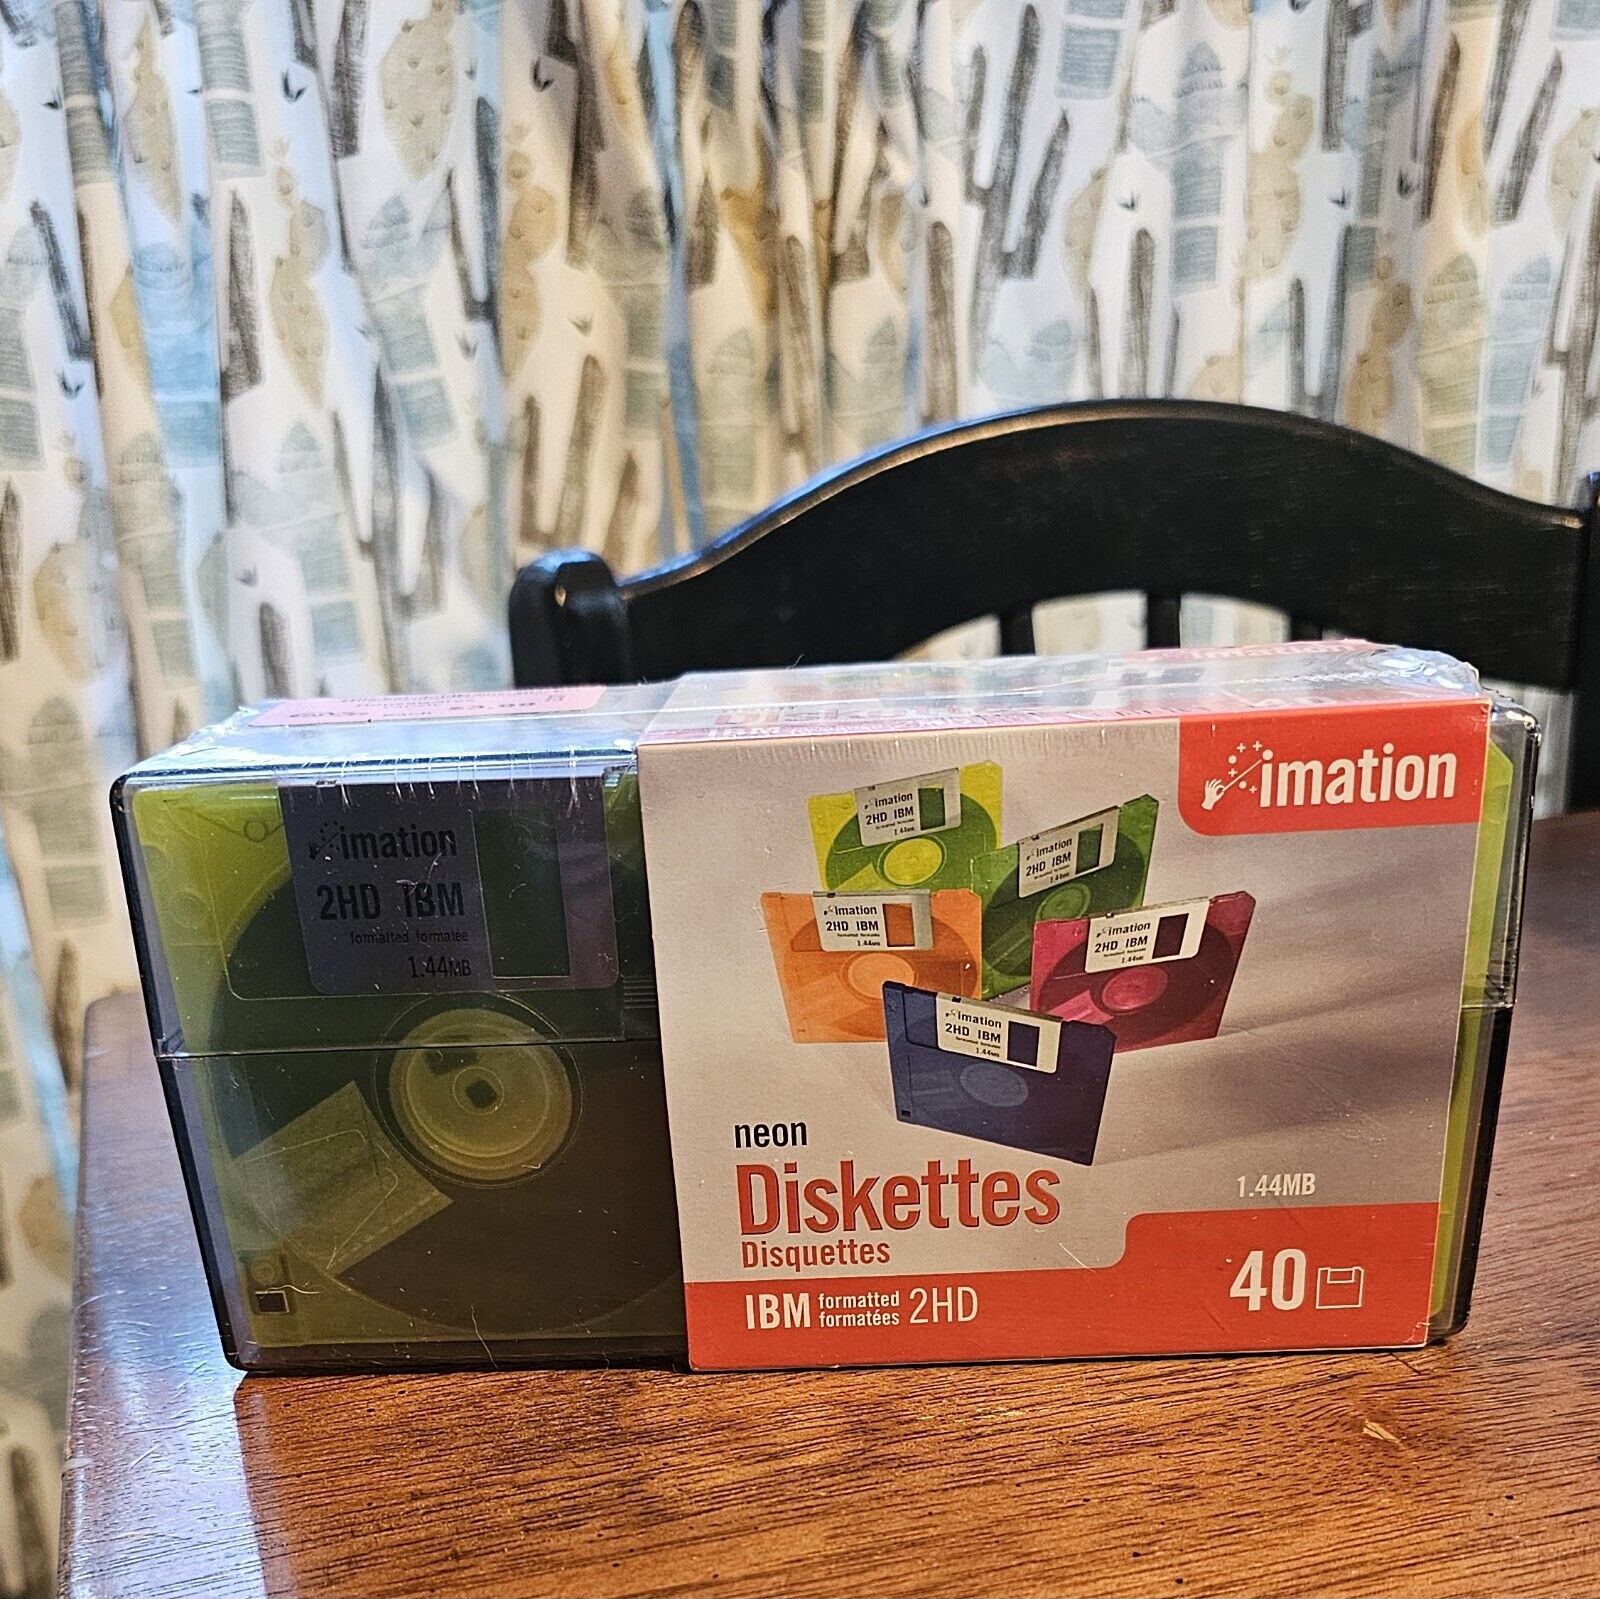 Imation Neon Diskettes 40 Pack IBM 2HD 3.5